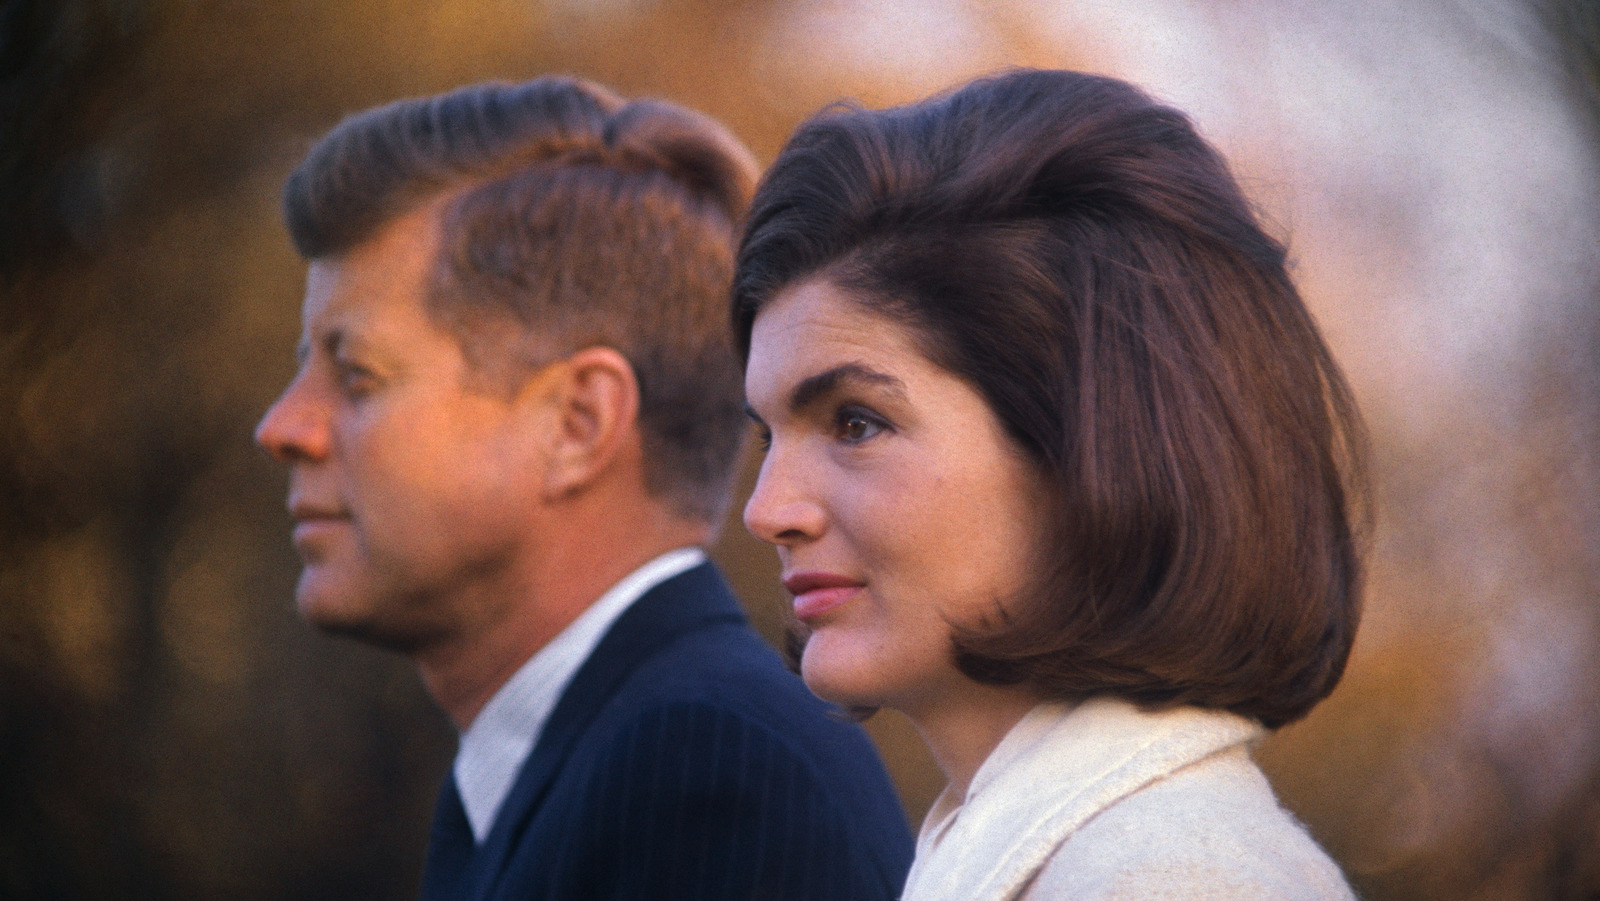 JFK Reportedly Once Abandoned Jackie In The Hospital To Be With